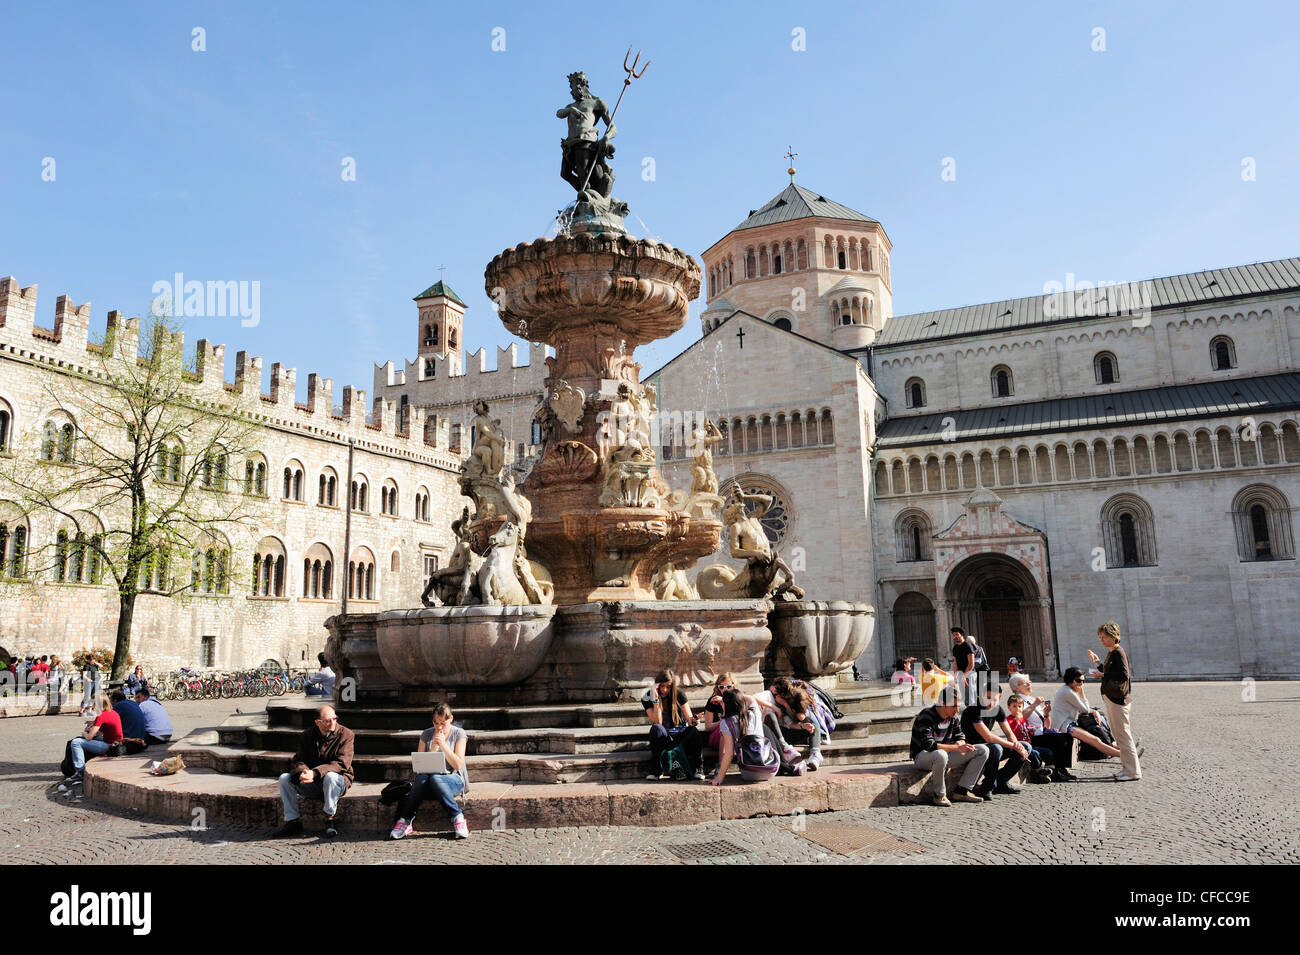 Group of people sitting at a fountain on the town square, cathedral in the background, Trento, Trentino, Italy, Europe Stock Photo